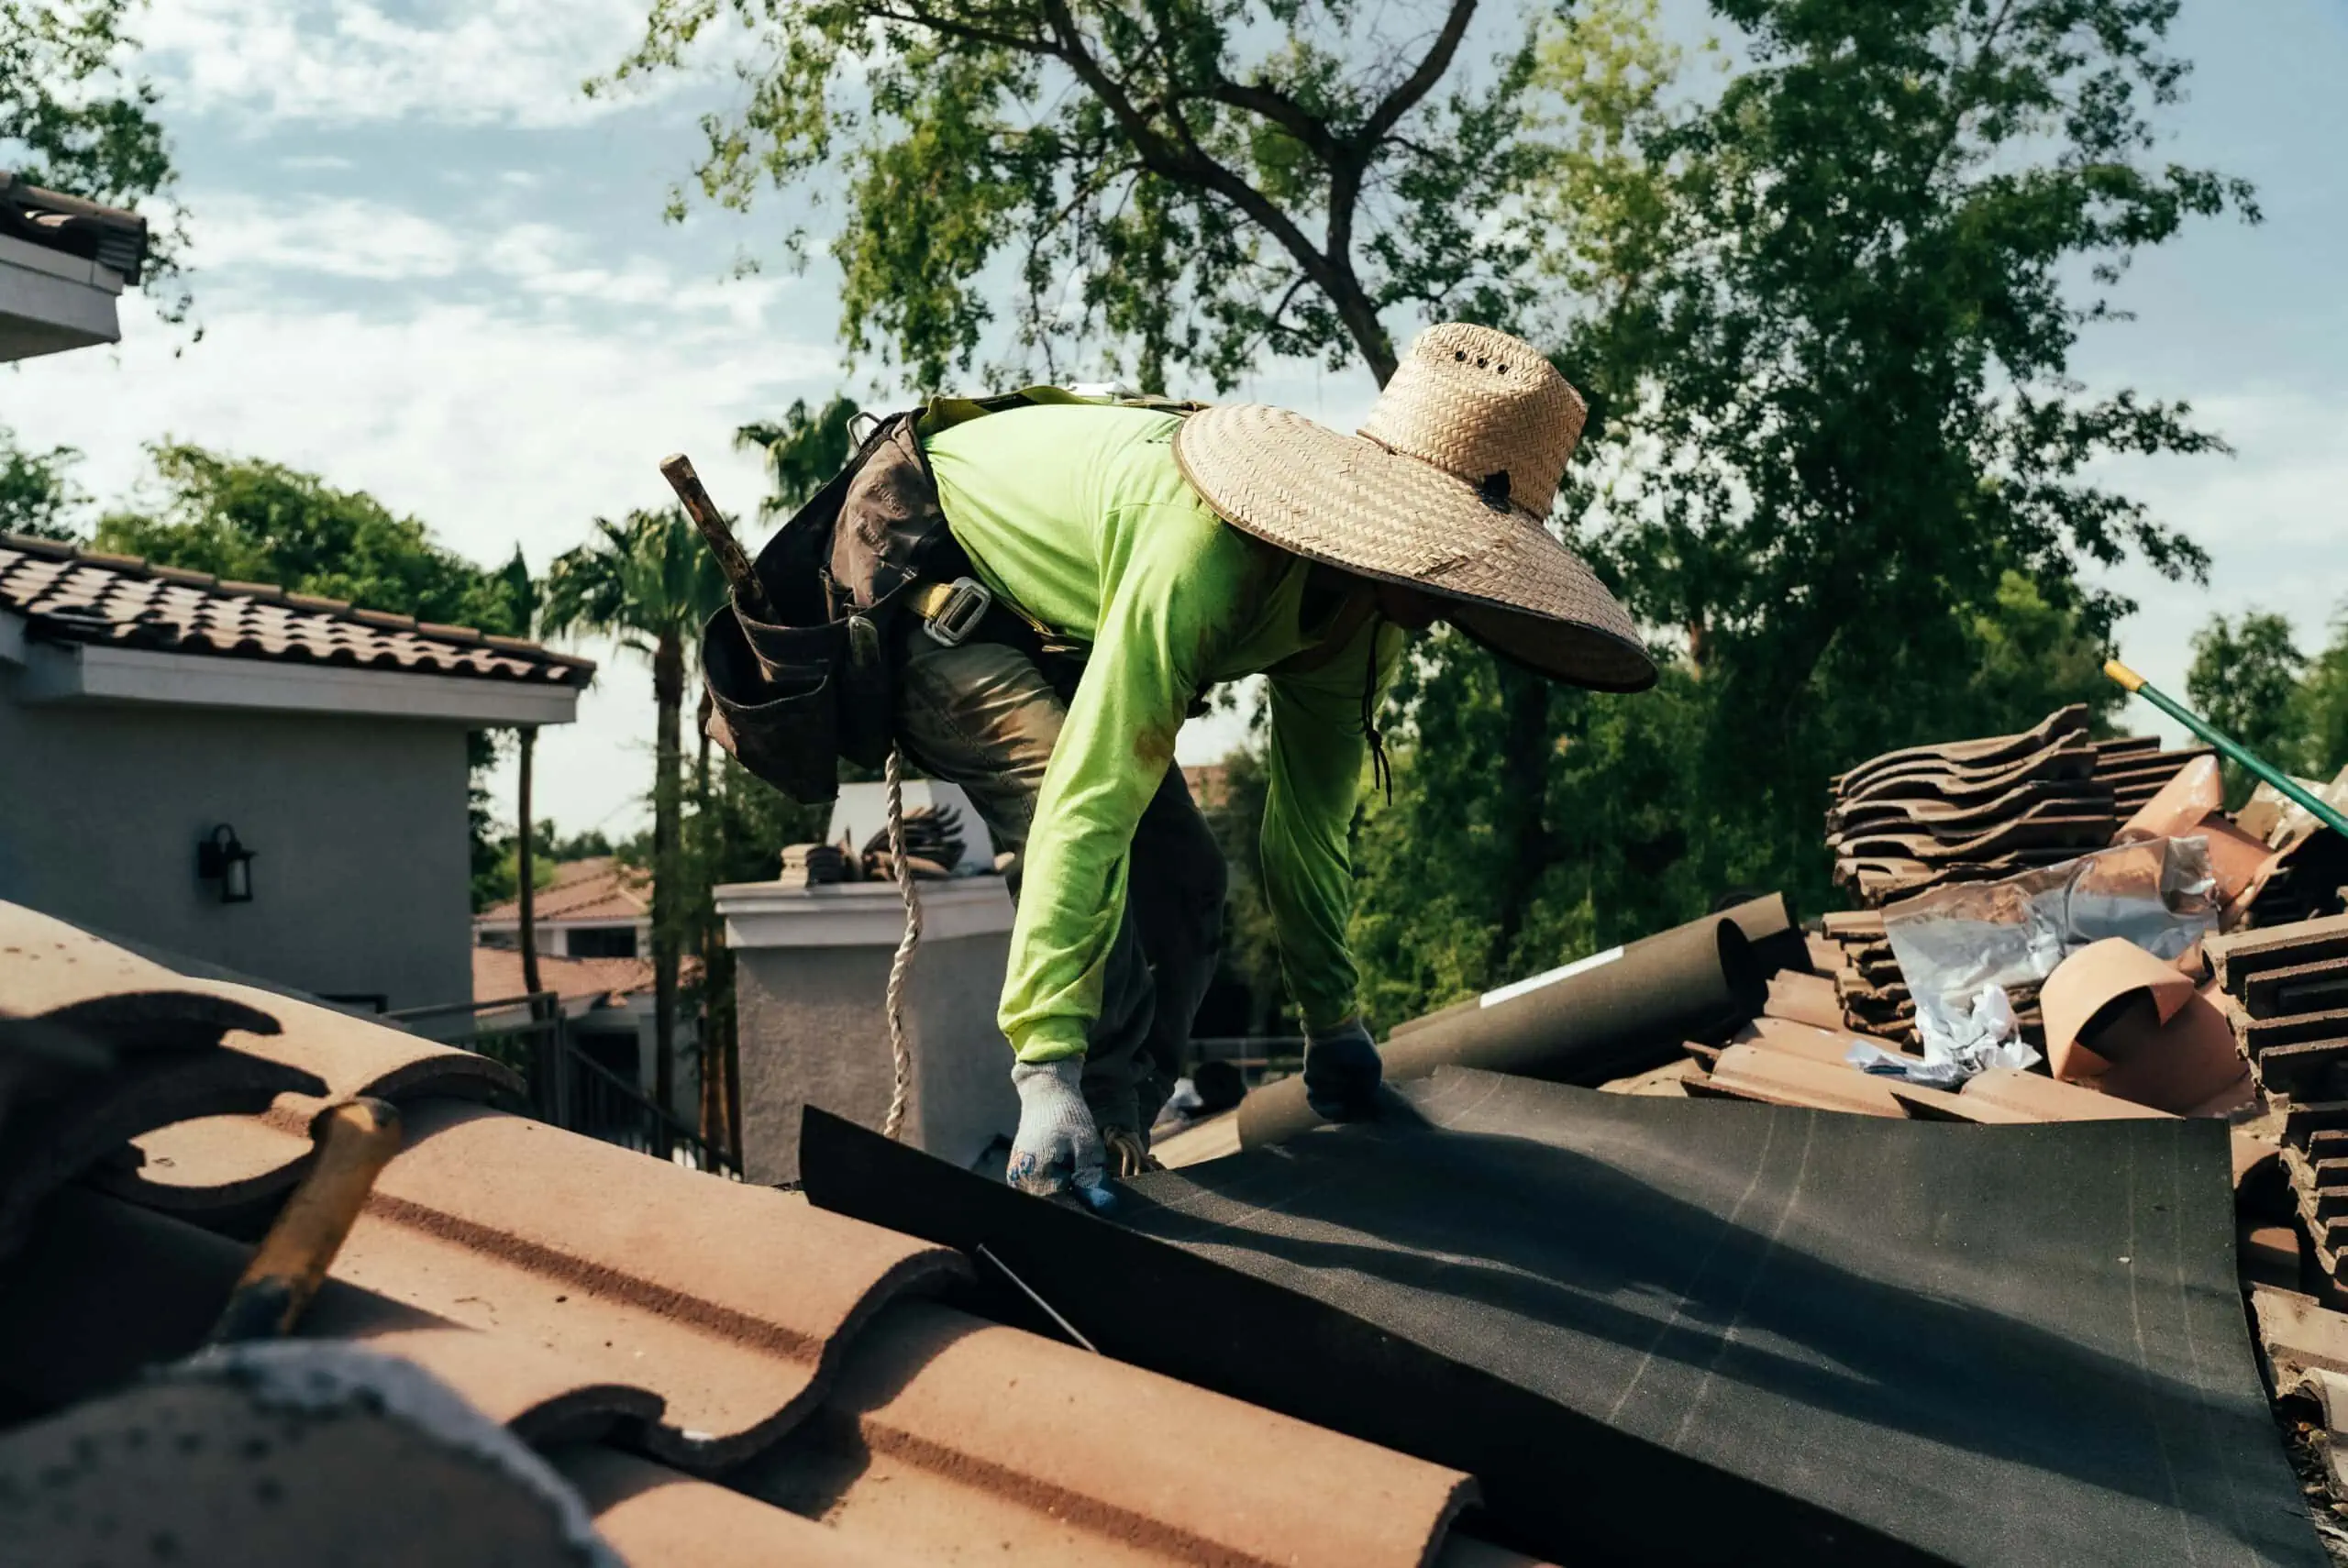 cave creek tile roof is being repaired by worker